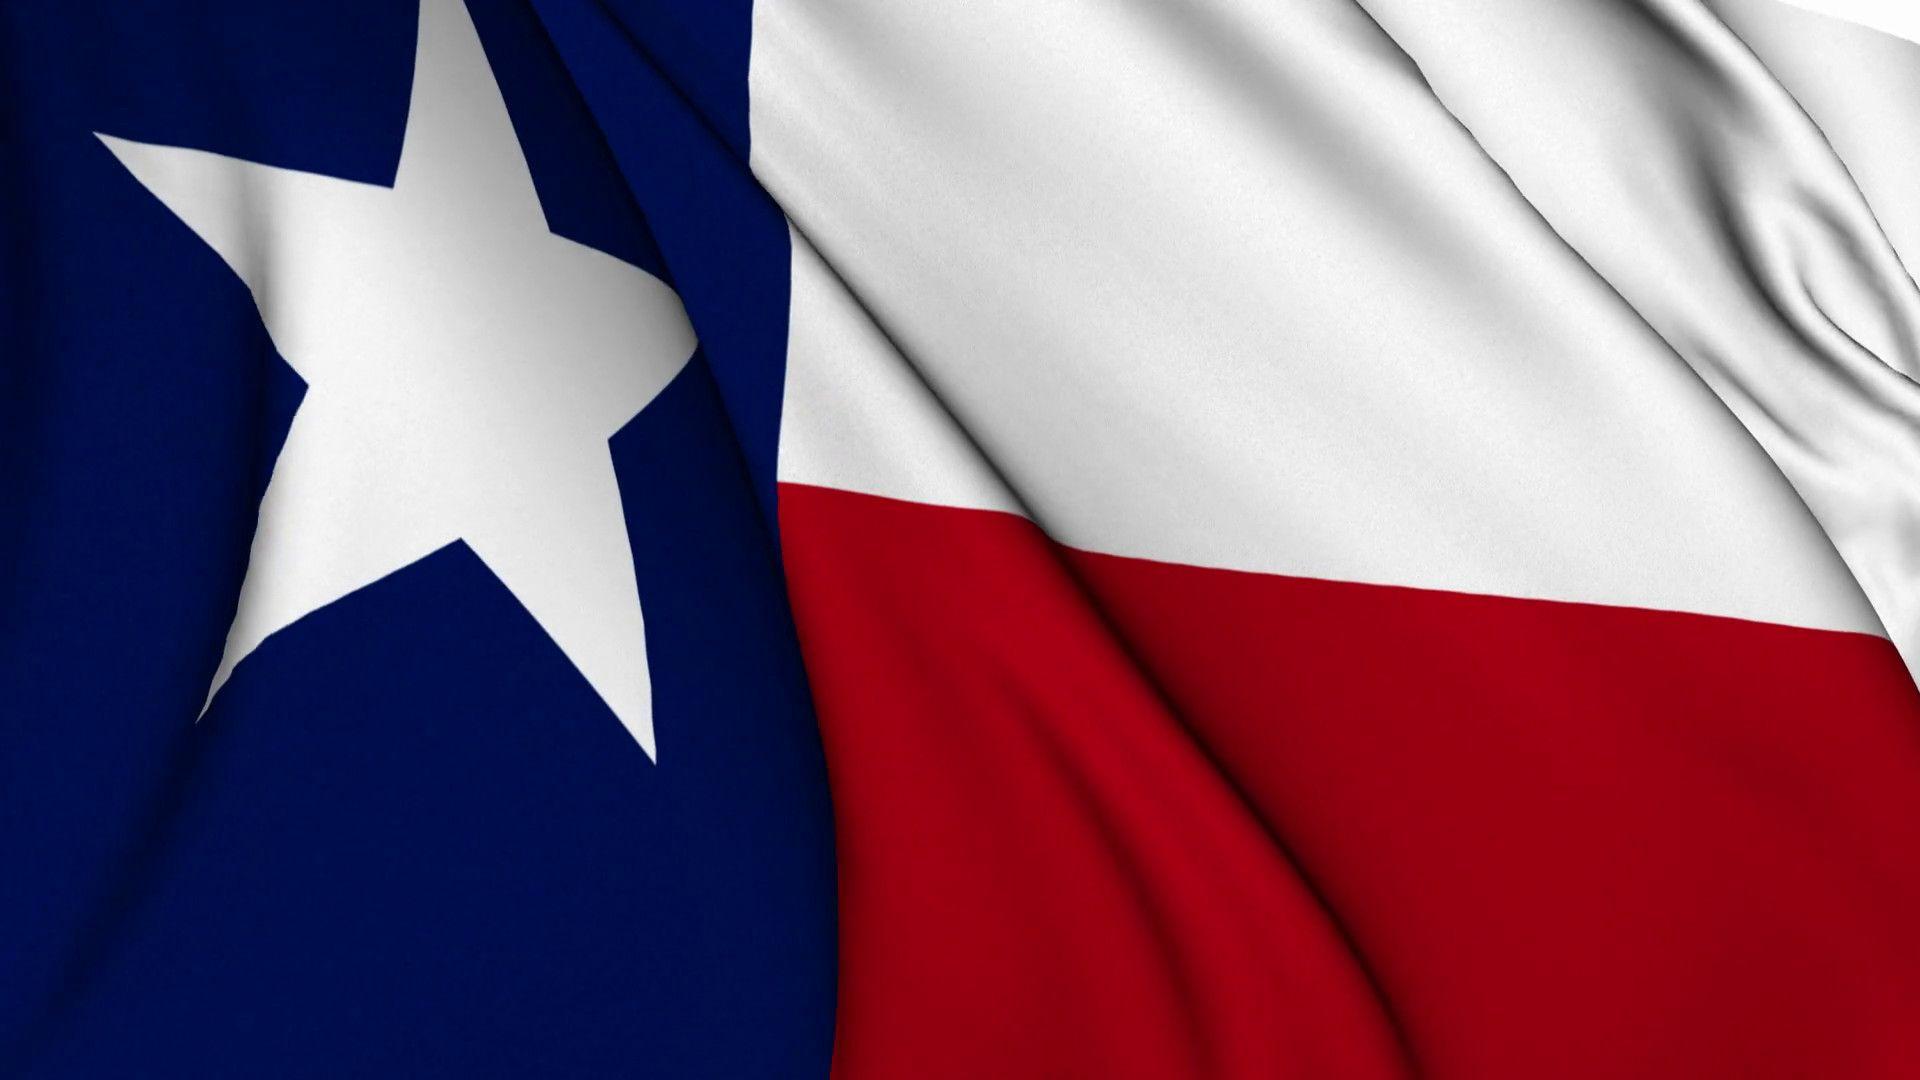 Texas Flag IPhone Wallpaper 55 images